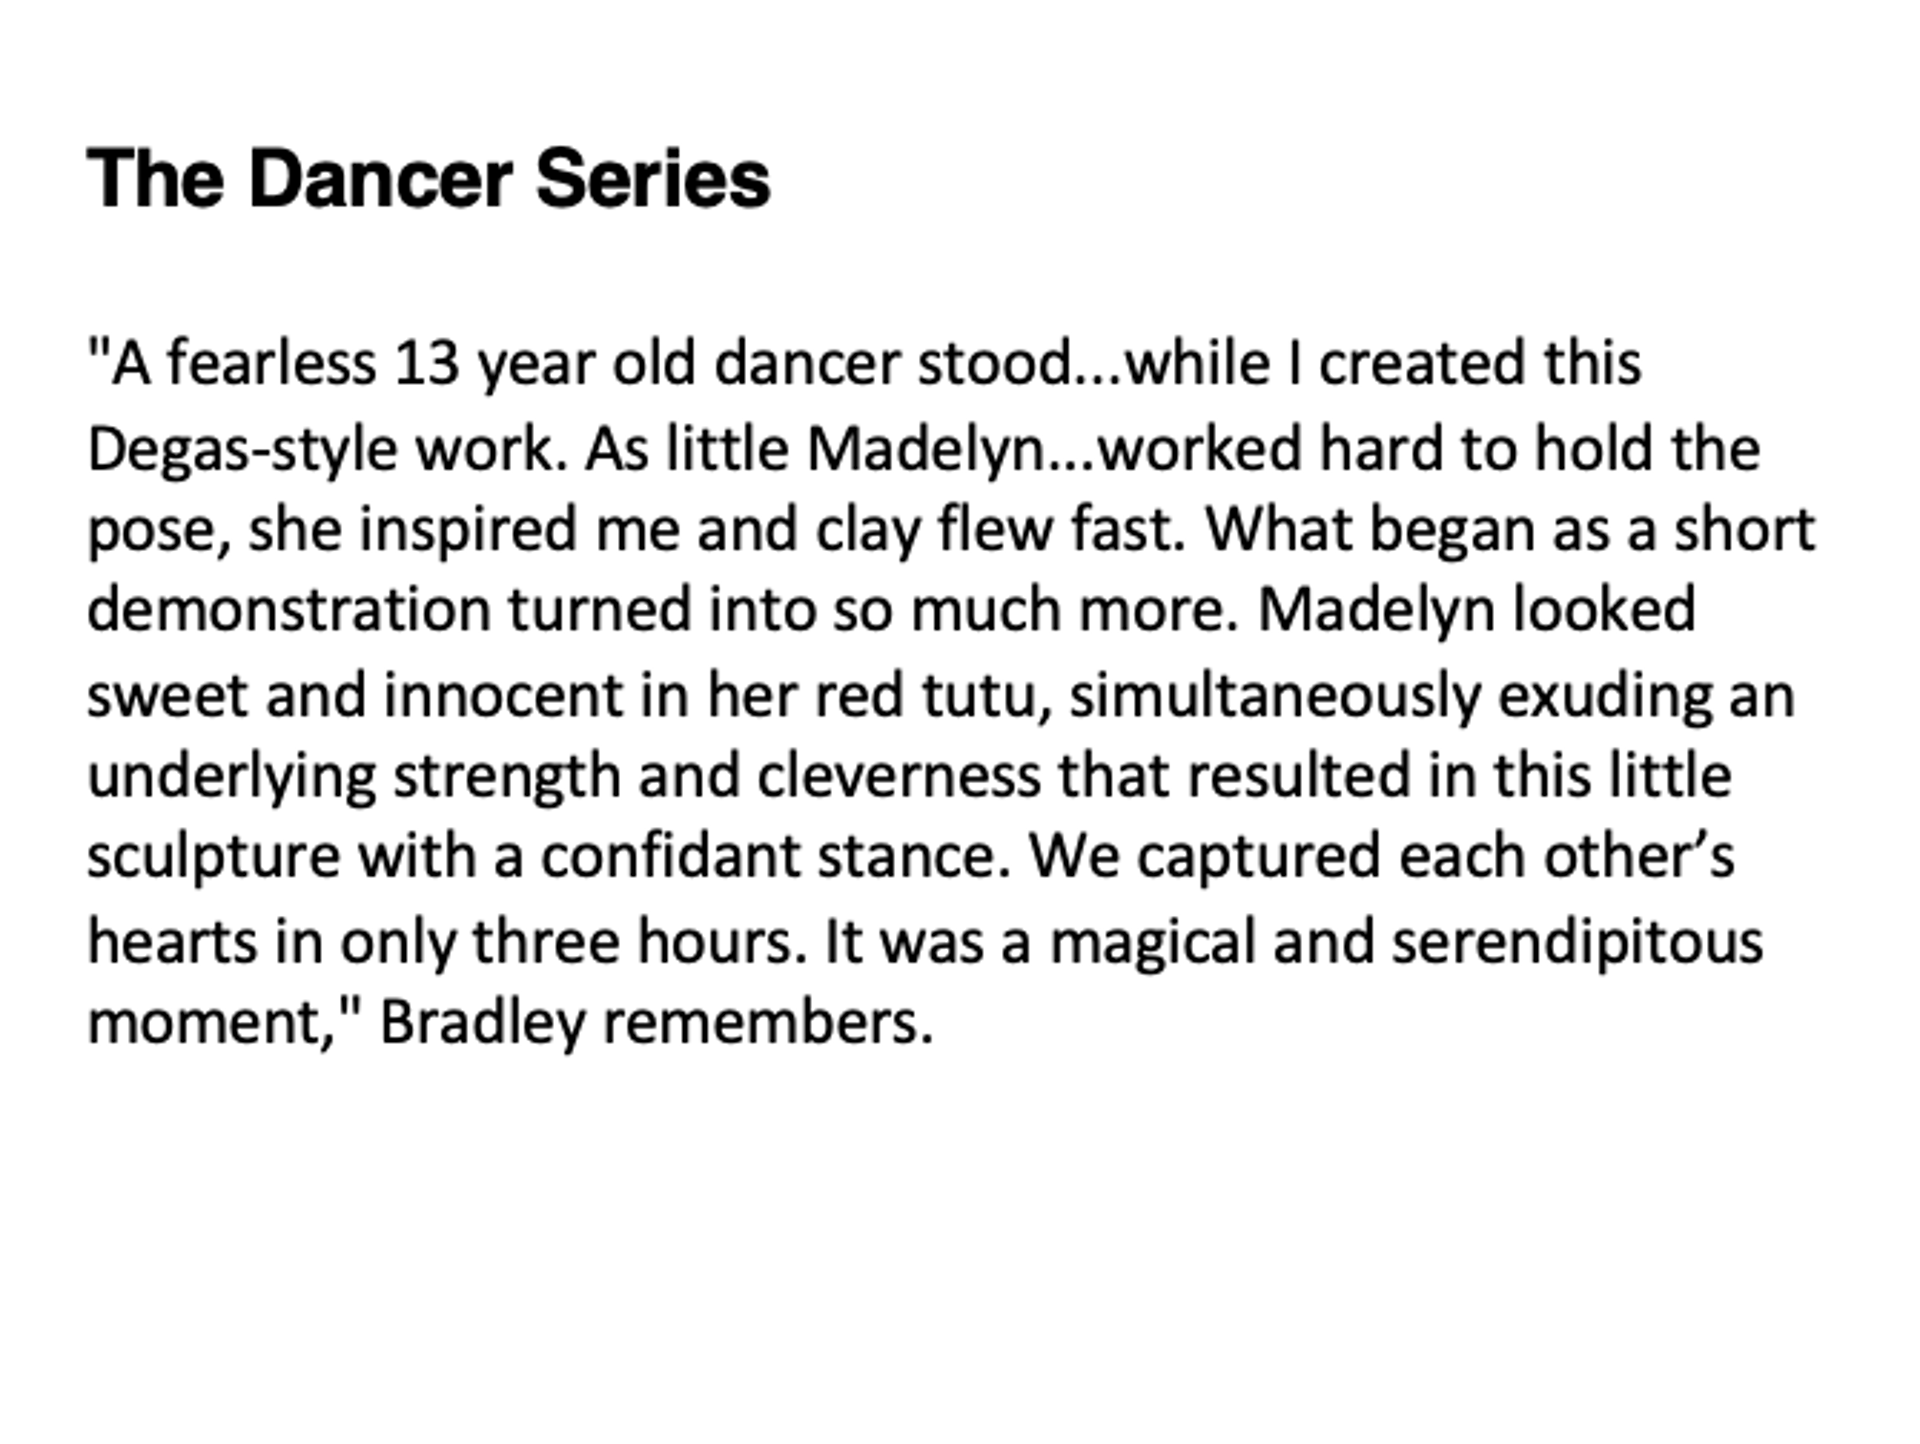 The Dancer Series, "Madelyn In Red"